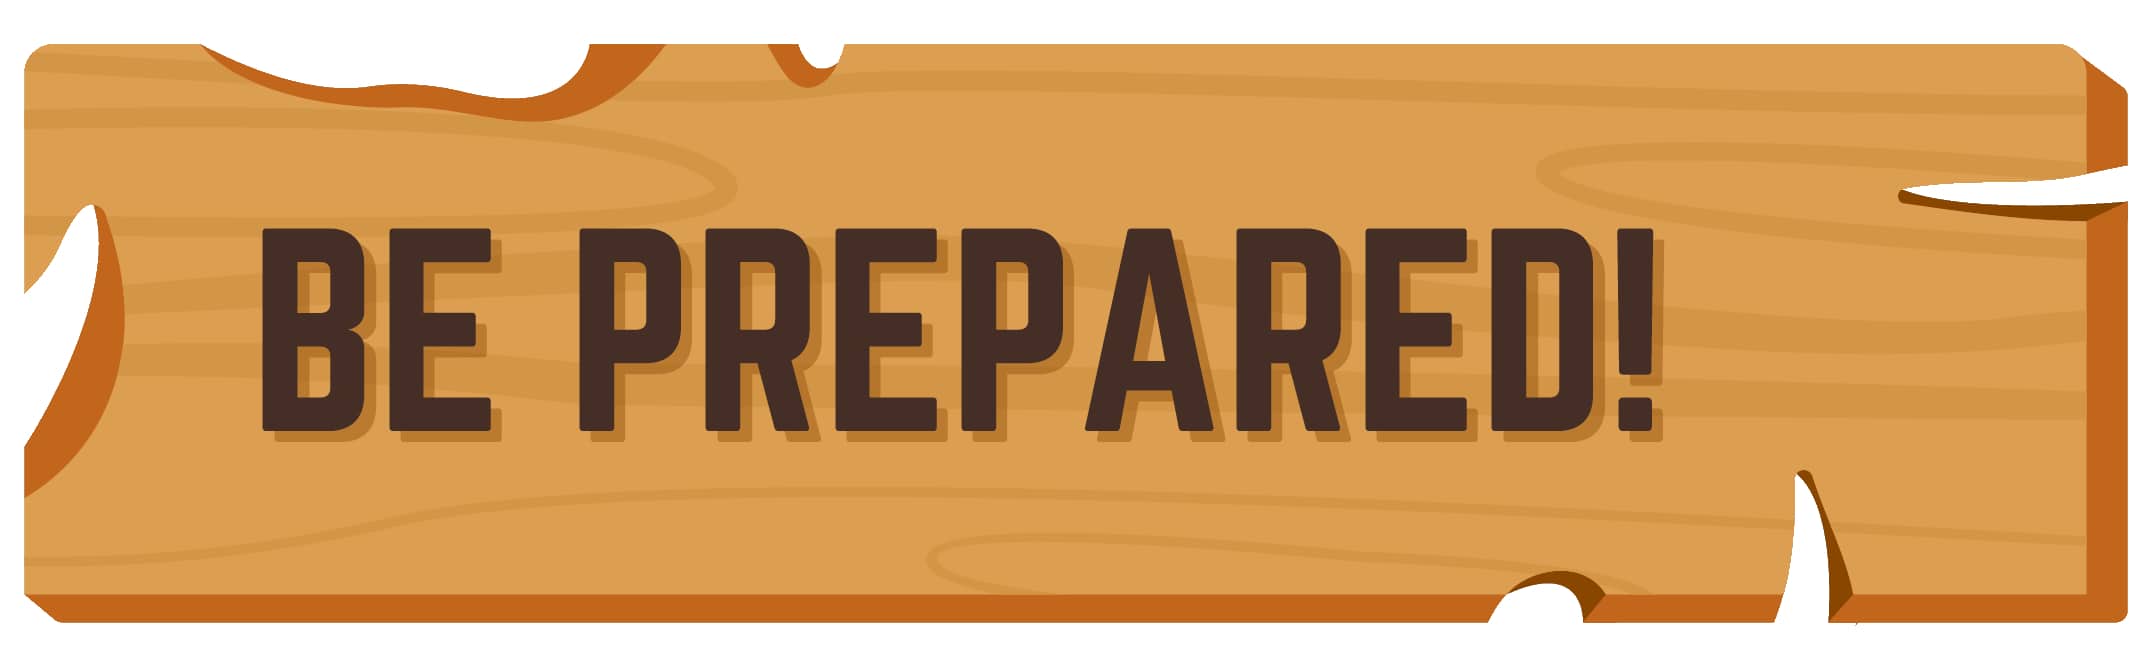 Wooden signpost illustration that reads: "Be Prepared"